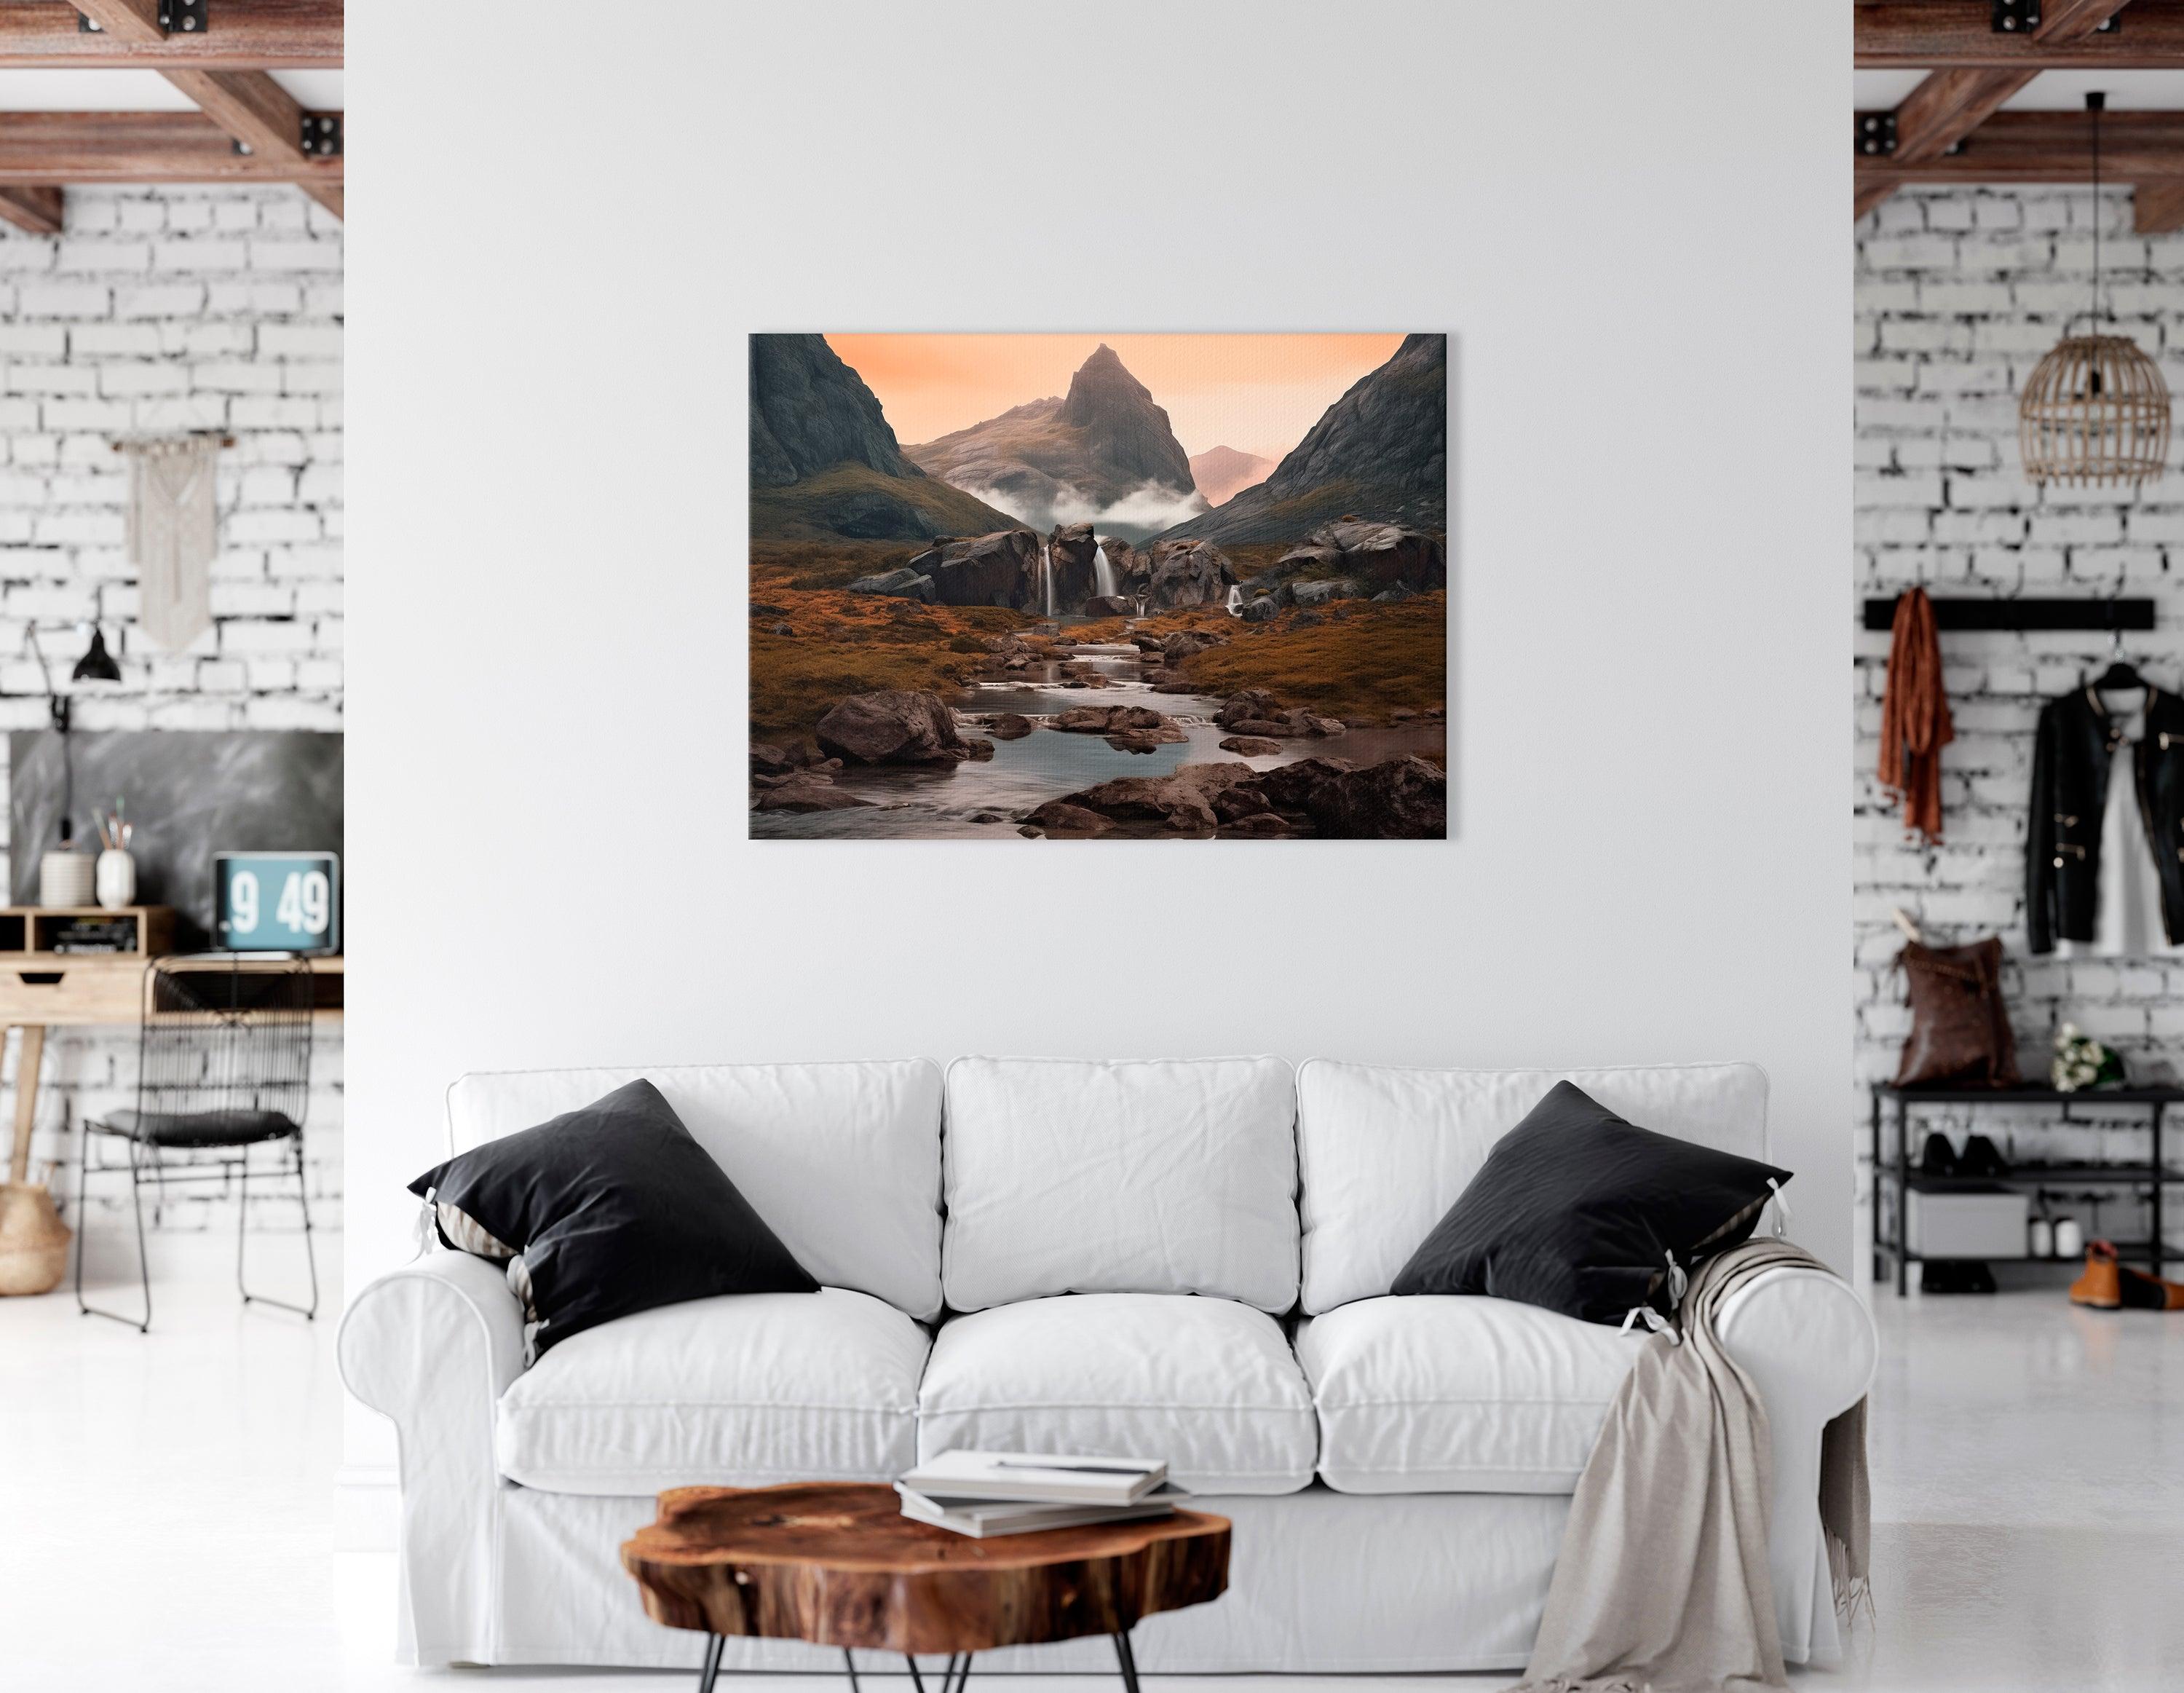 Iceland Landscape with Mountains and Waterfall - Canvas Print - Artoholica Ready to Hang Canvas Print